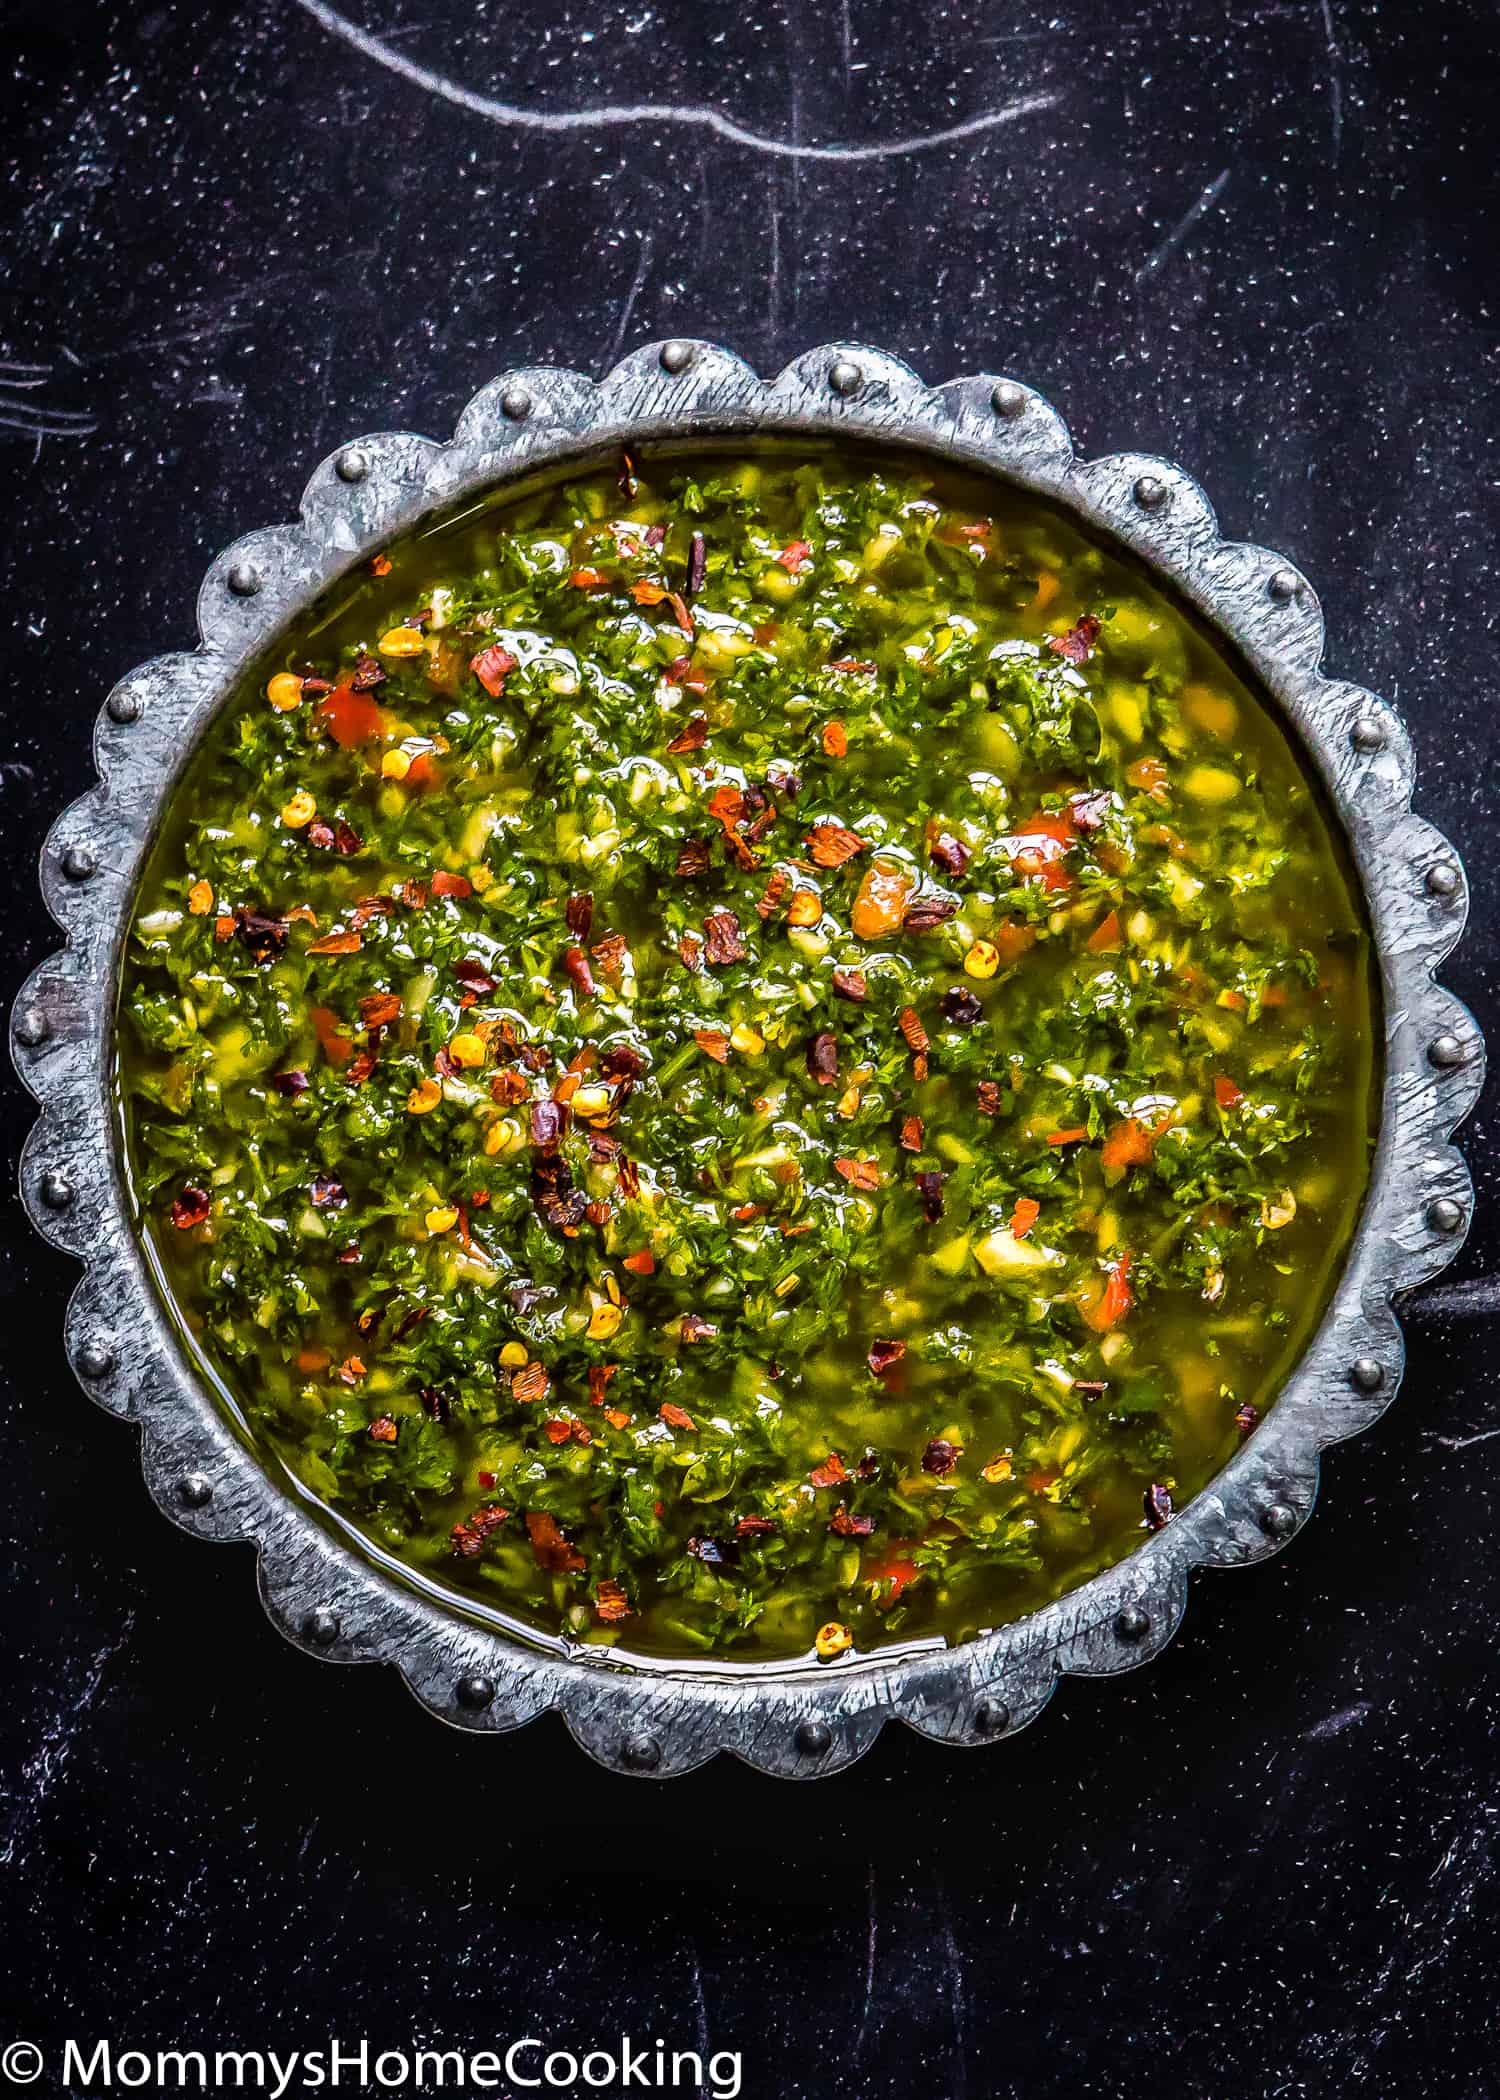 Chimichurri Sauce in a plate over a black surface.